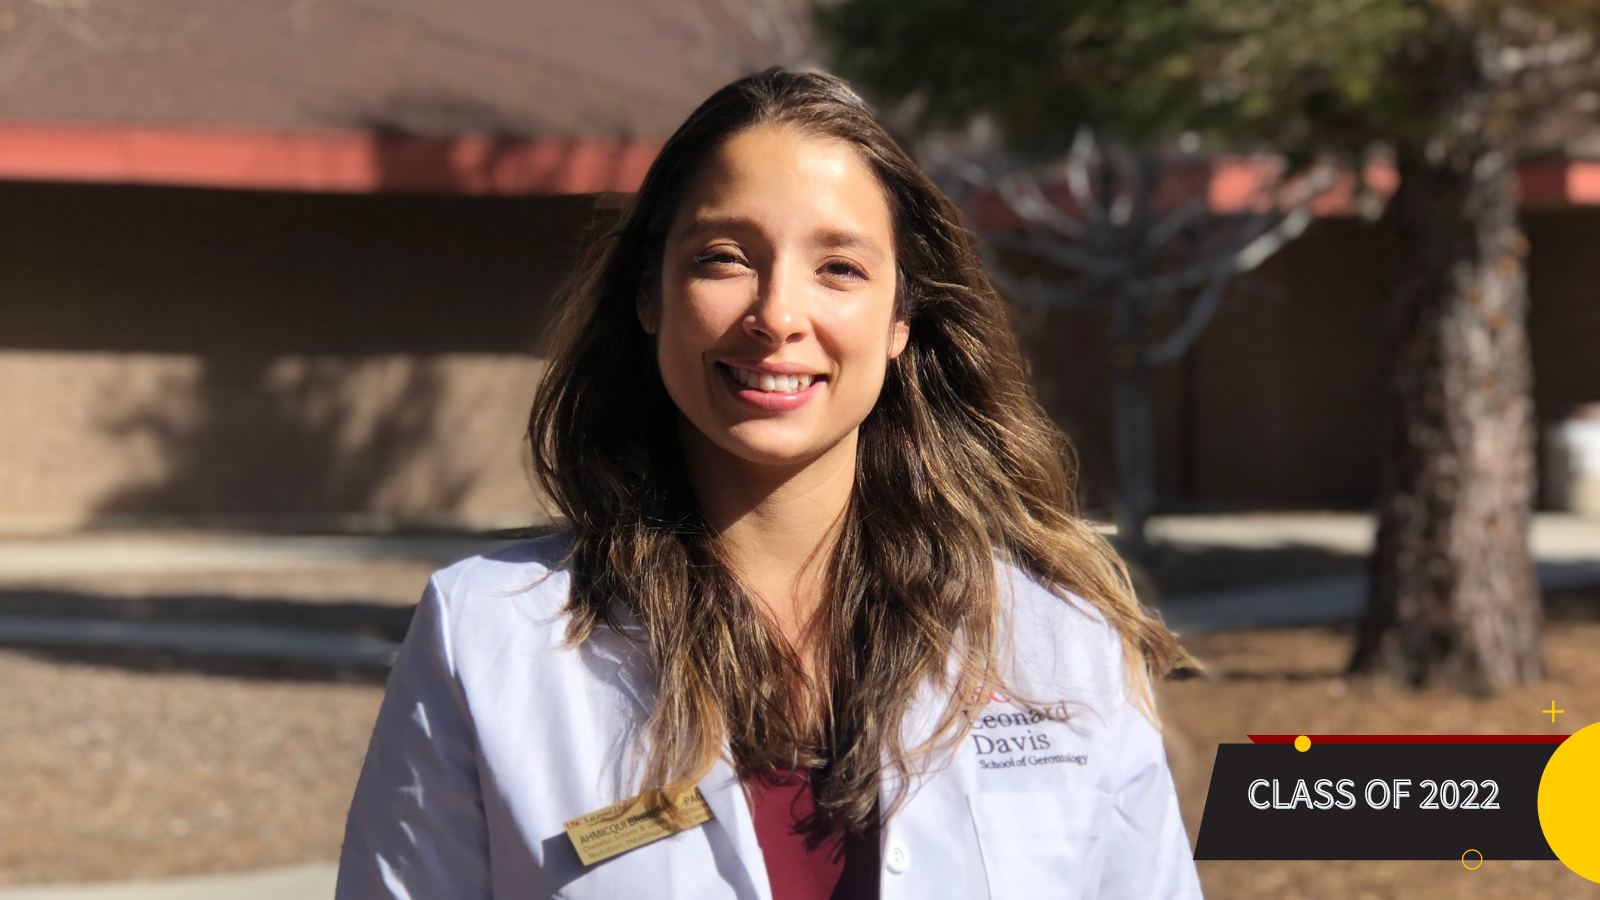 MSNHL grad has a recipe for helping others through food. Ahmicqui Bribiescas-Page plans to become a registered dietitian who connects health, culture and nutrition